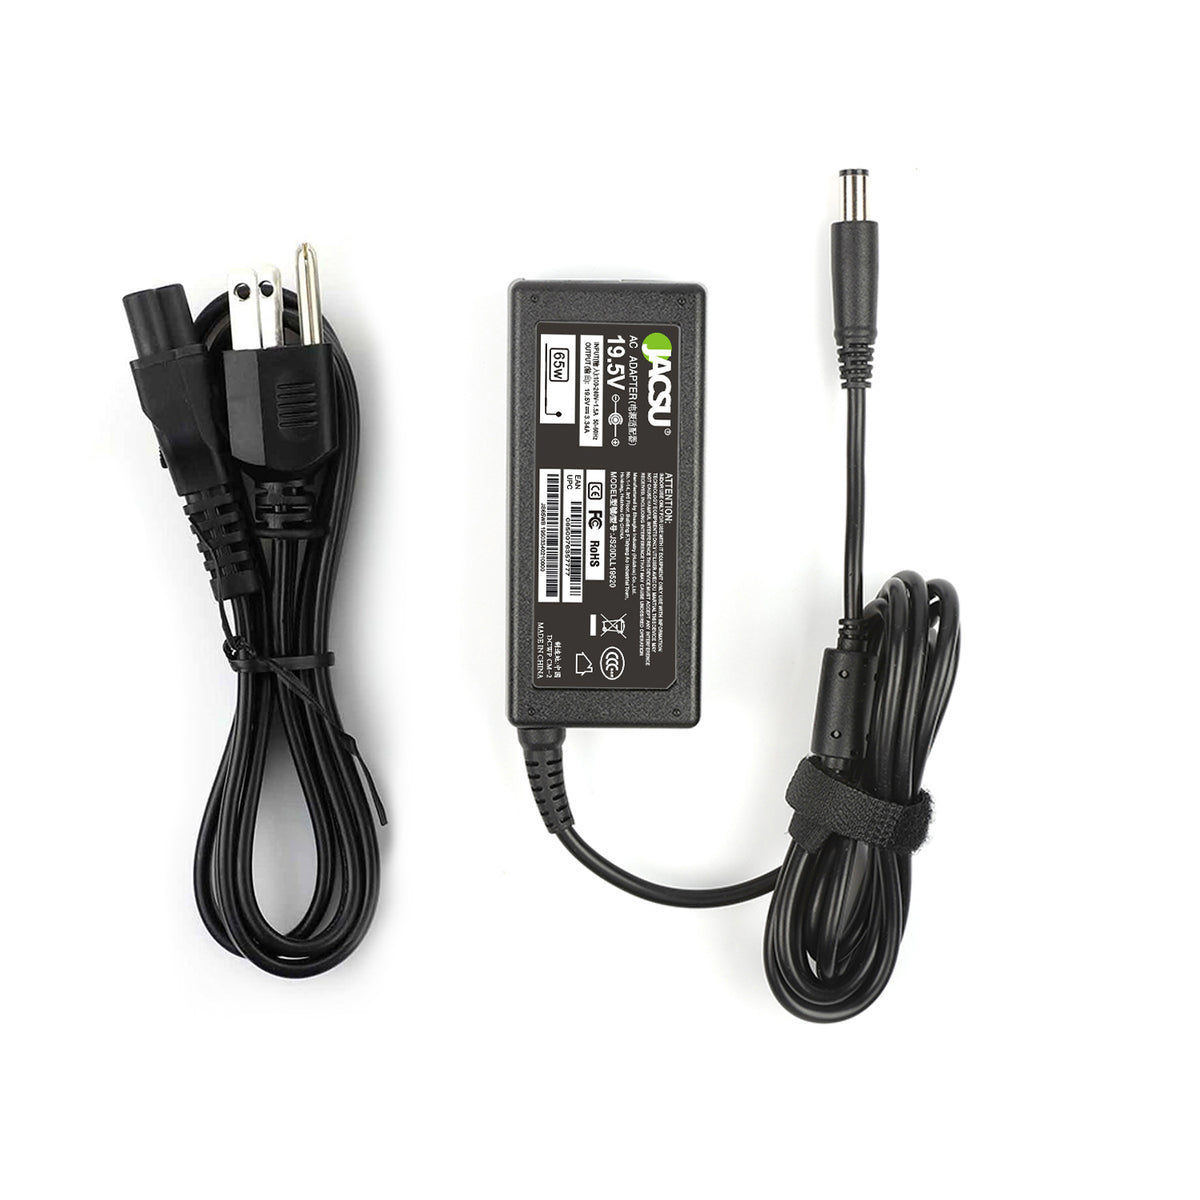 Jacsu DELL 19.5V 3.34A 65W Pin 7.4x5.0mm Power Laptop Adapter Charger LA65NS2-01 PA-12 Family XPS M140 M65